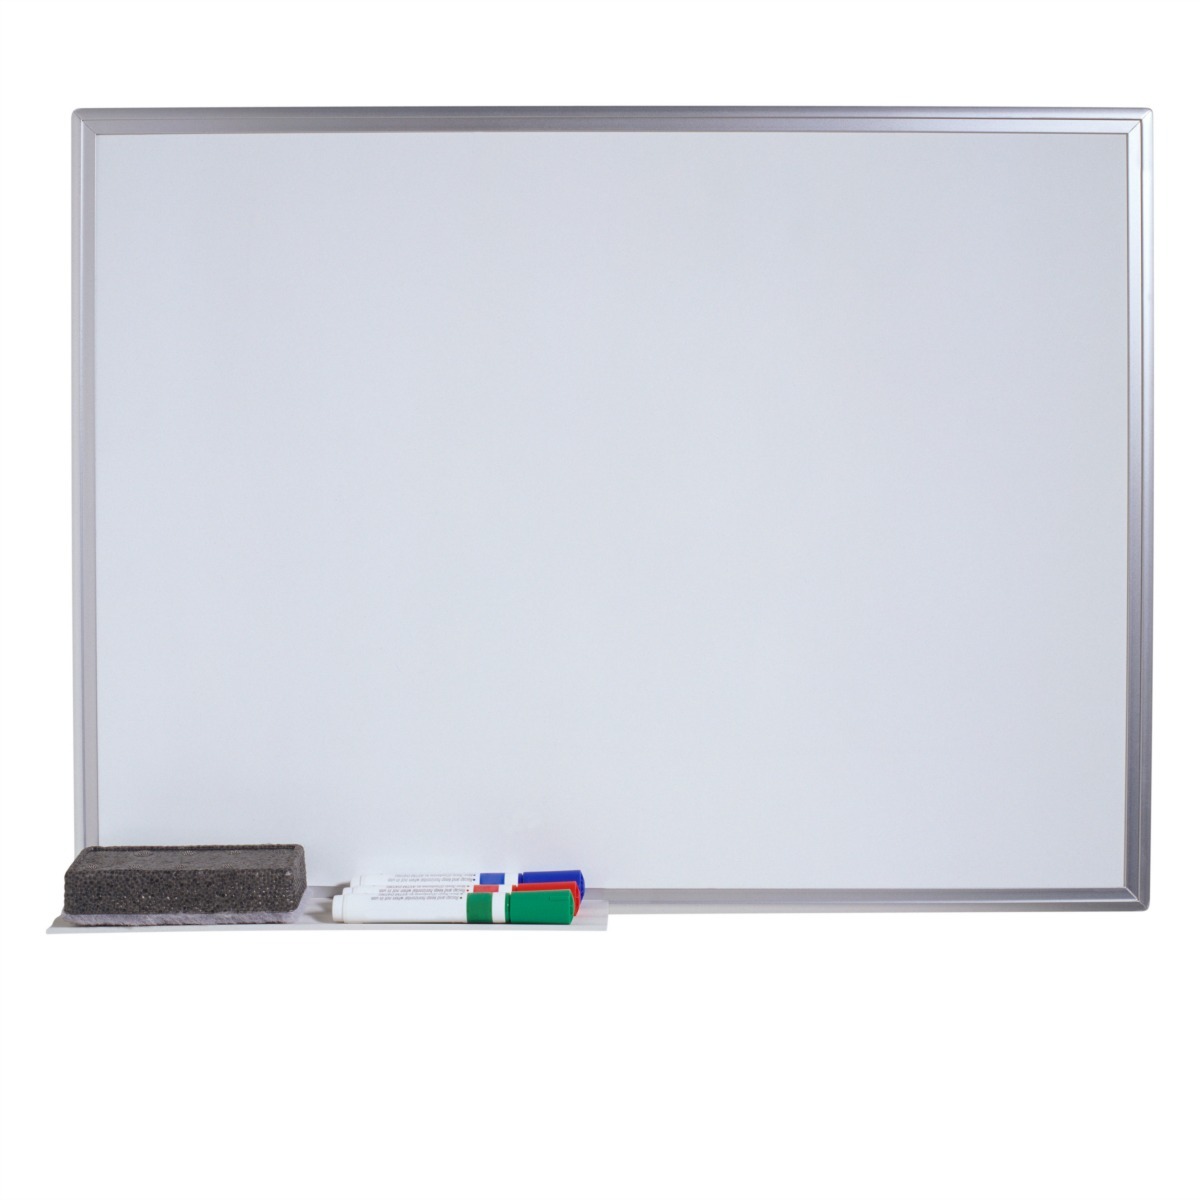 Cleaning Sticky Residue from a Dry Erase Board? | ThriftyFun